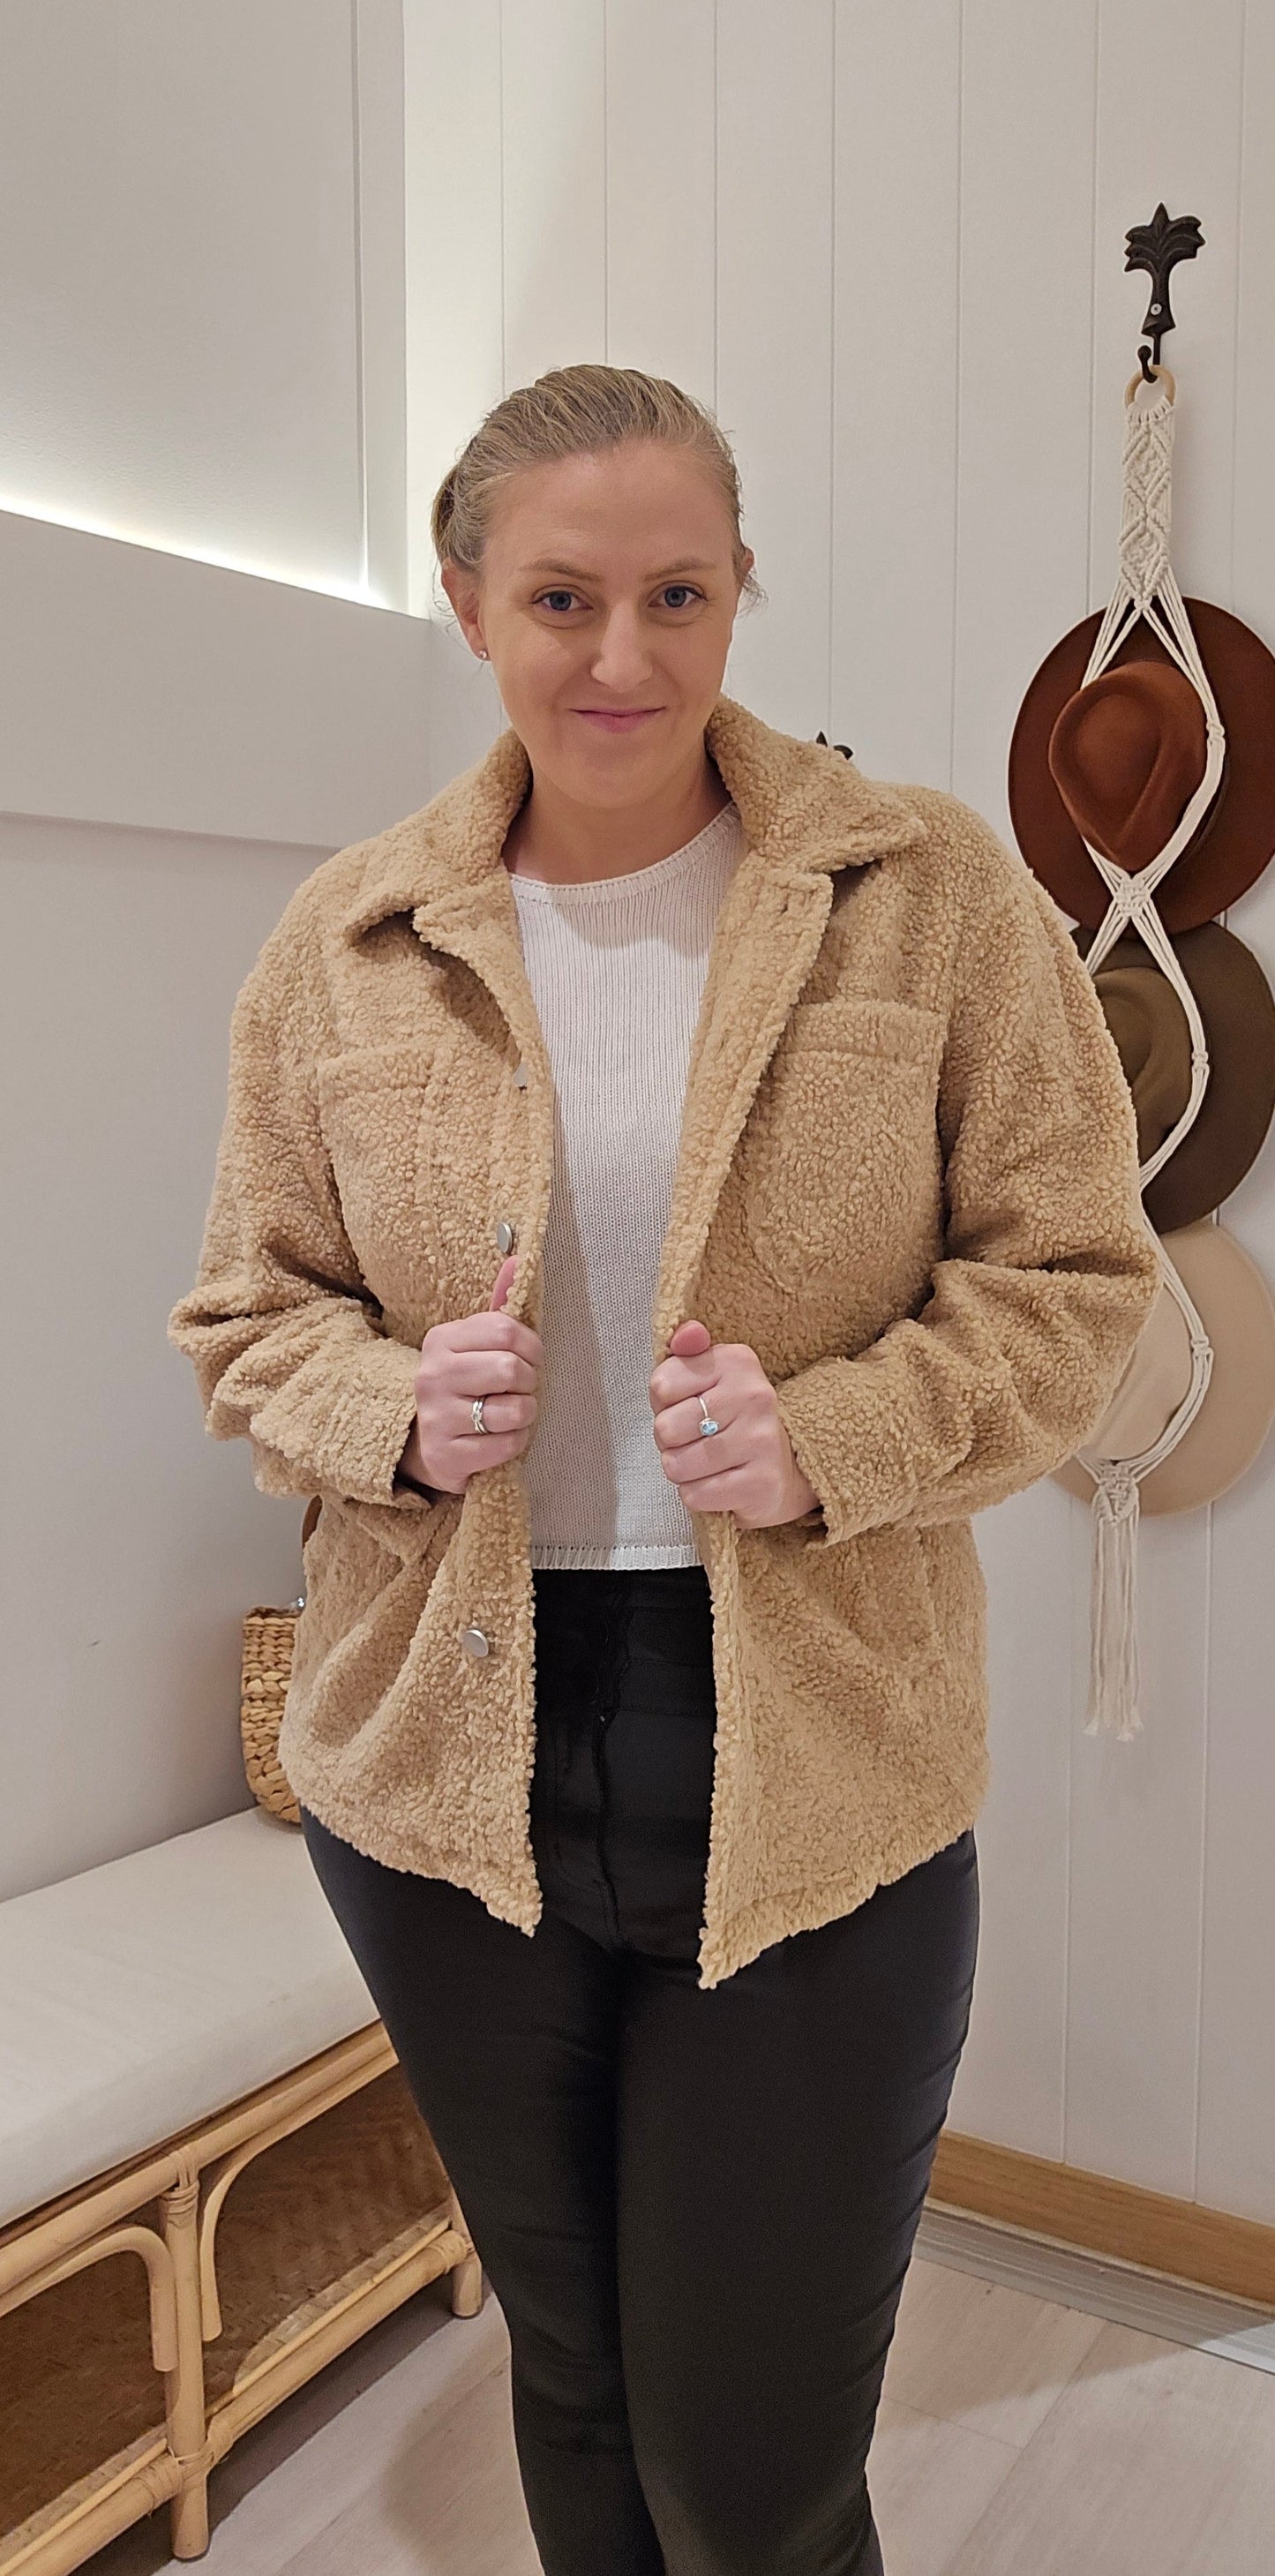 Stay warm and stylish with the Teddi Coat in classic brown! Made with a wool-like material, this coat features 4 practical pockets and button sleeves for added convenience. Perfect for braving chilly weather in style.